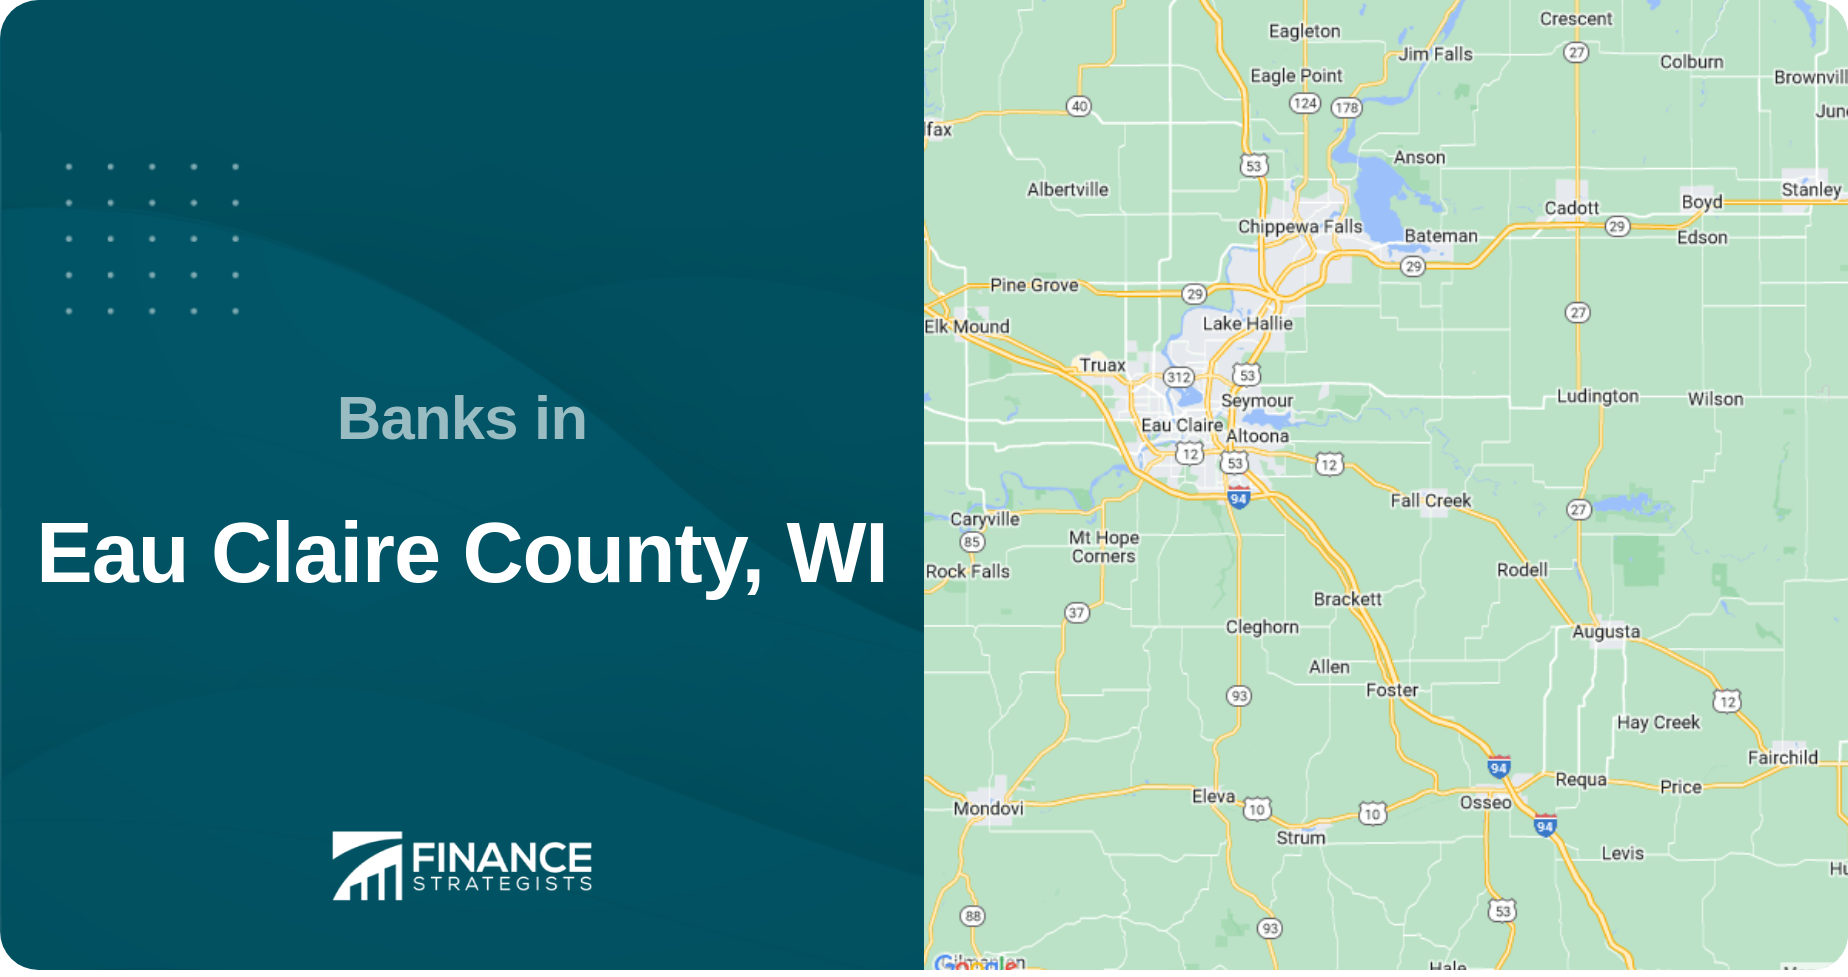 Banks in Eau Claire County, WI